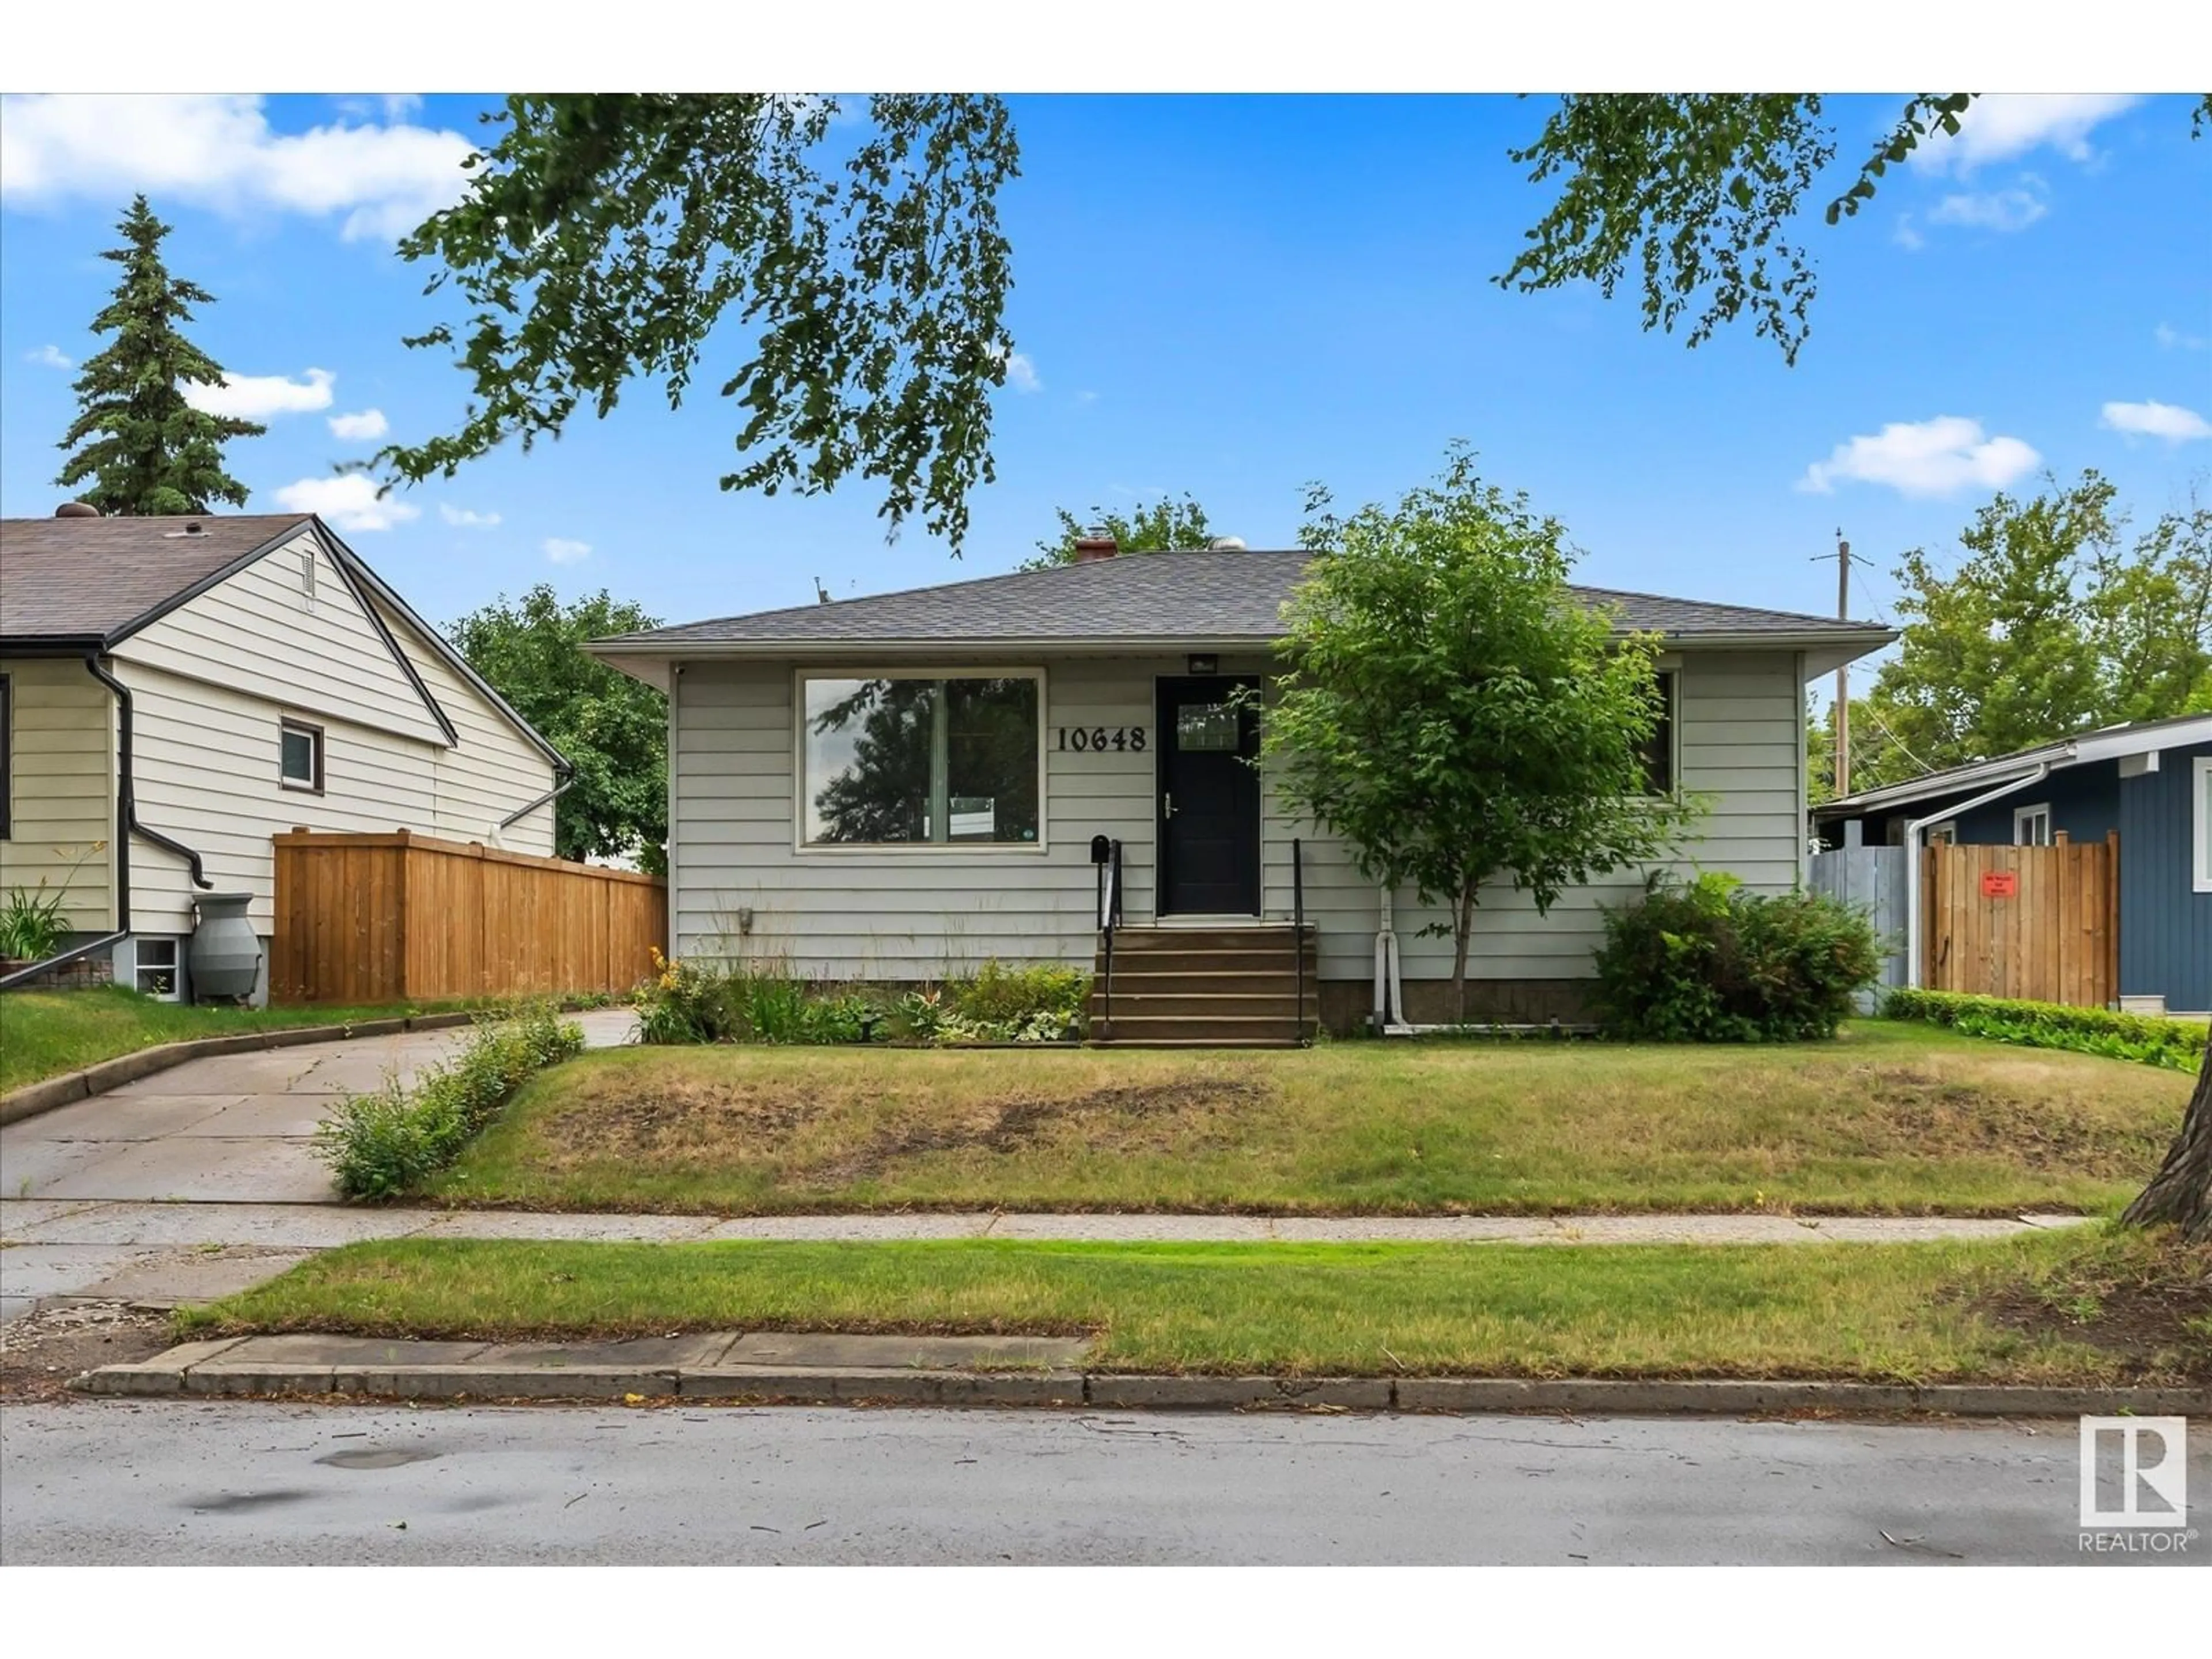 Frontside or backside of a home for 10648 79 ST NW, Edmonton Alberta T6A3H4